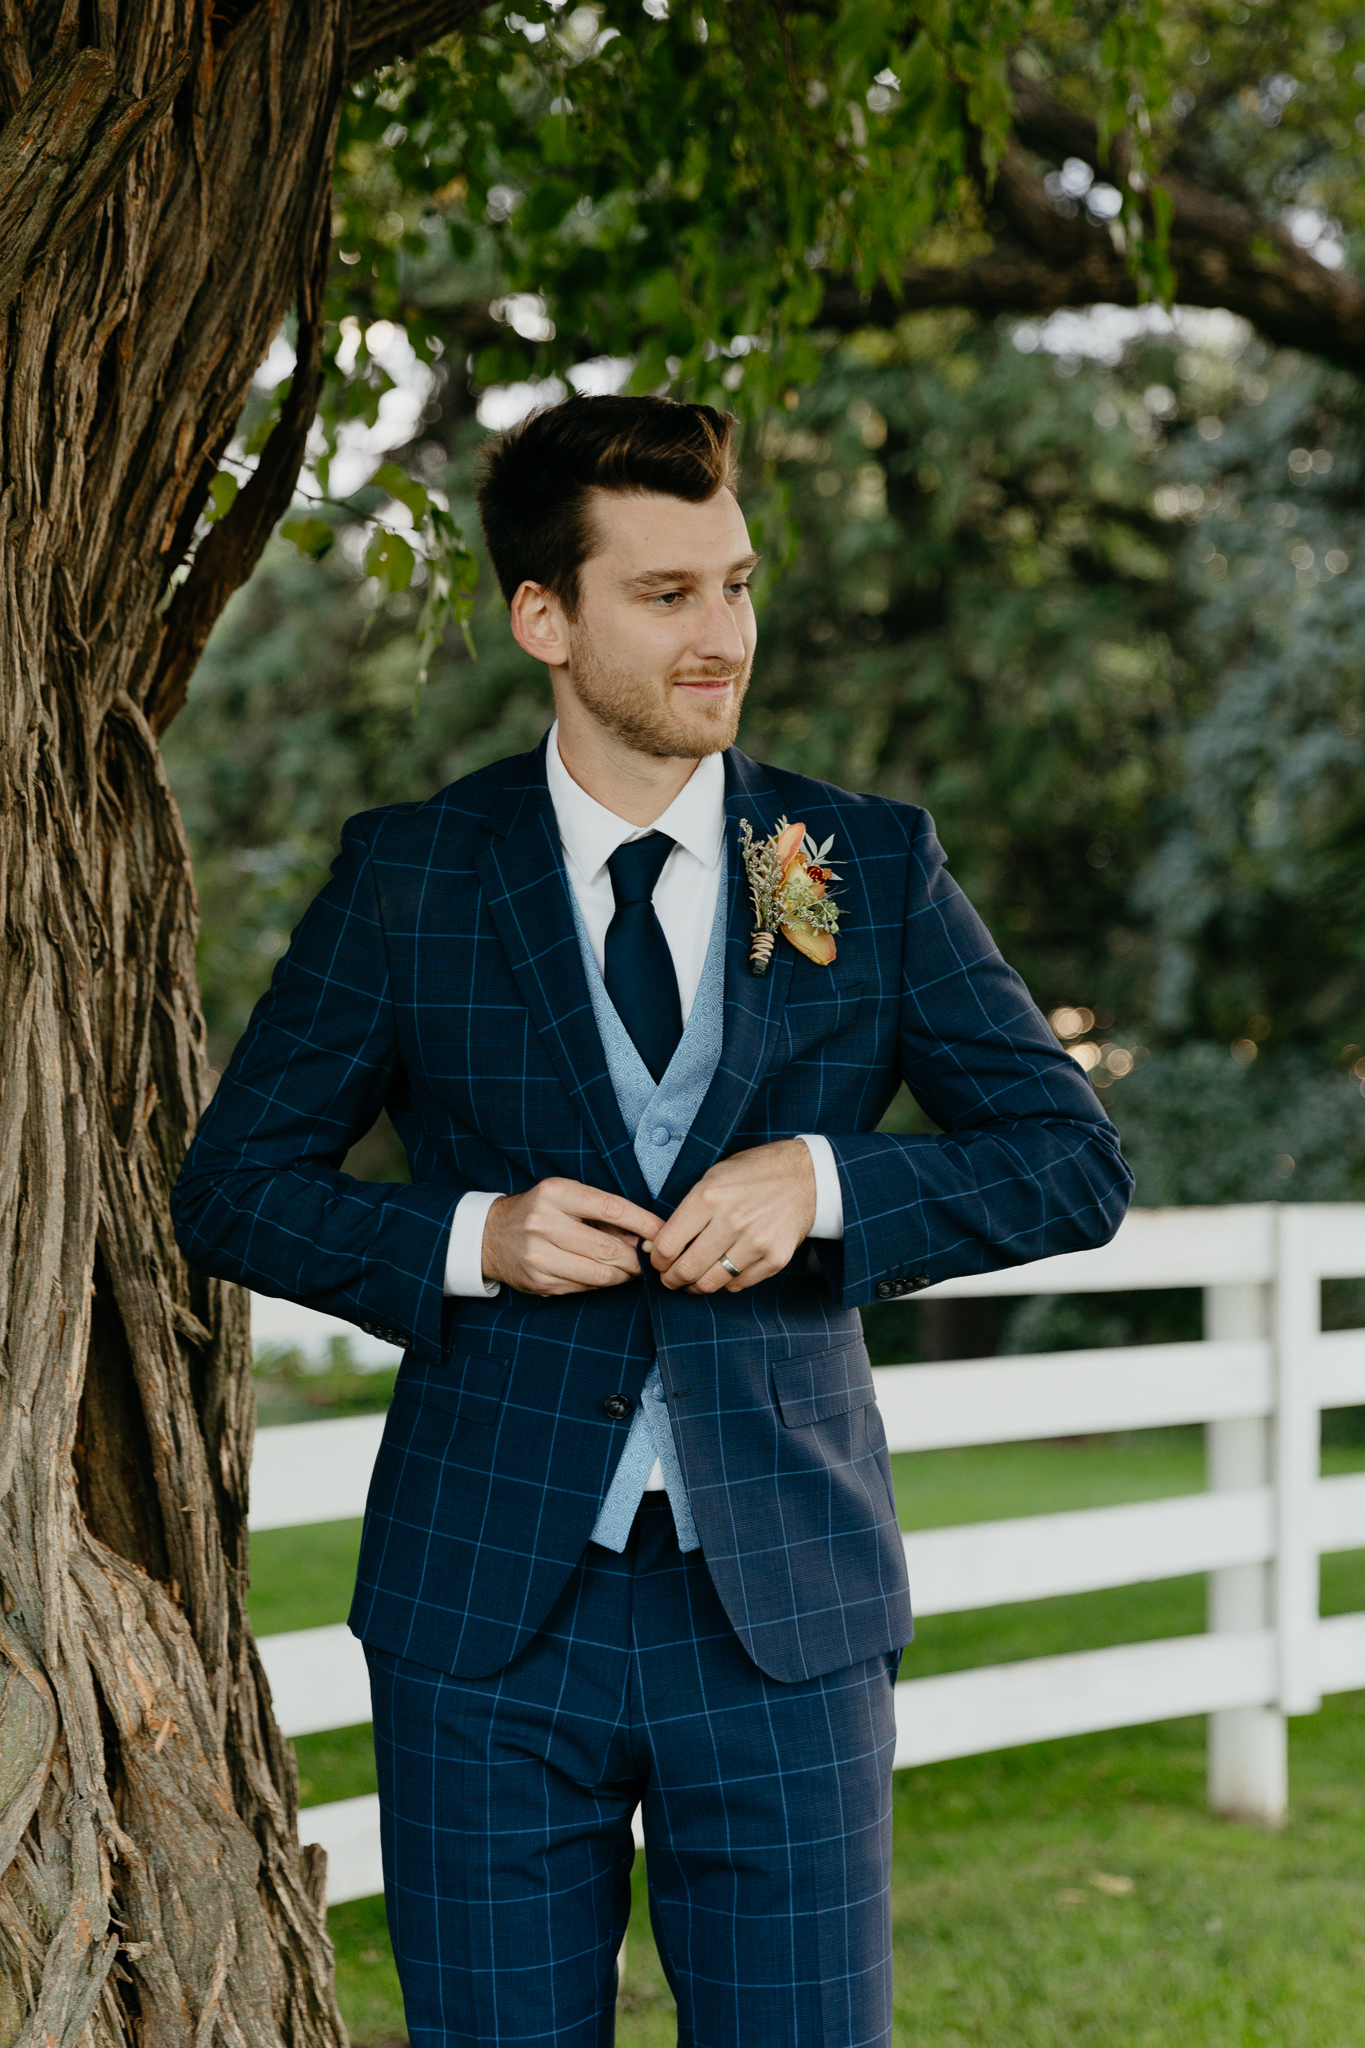 Groom adjusts his navy blue suit next to a horse pasture and large old tree